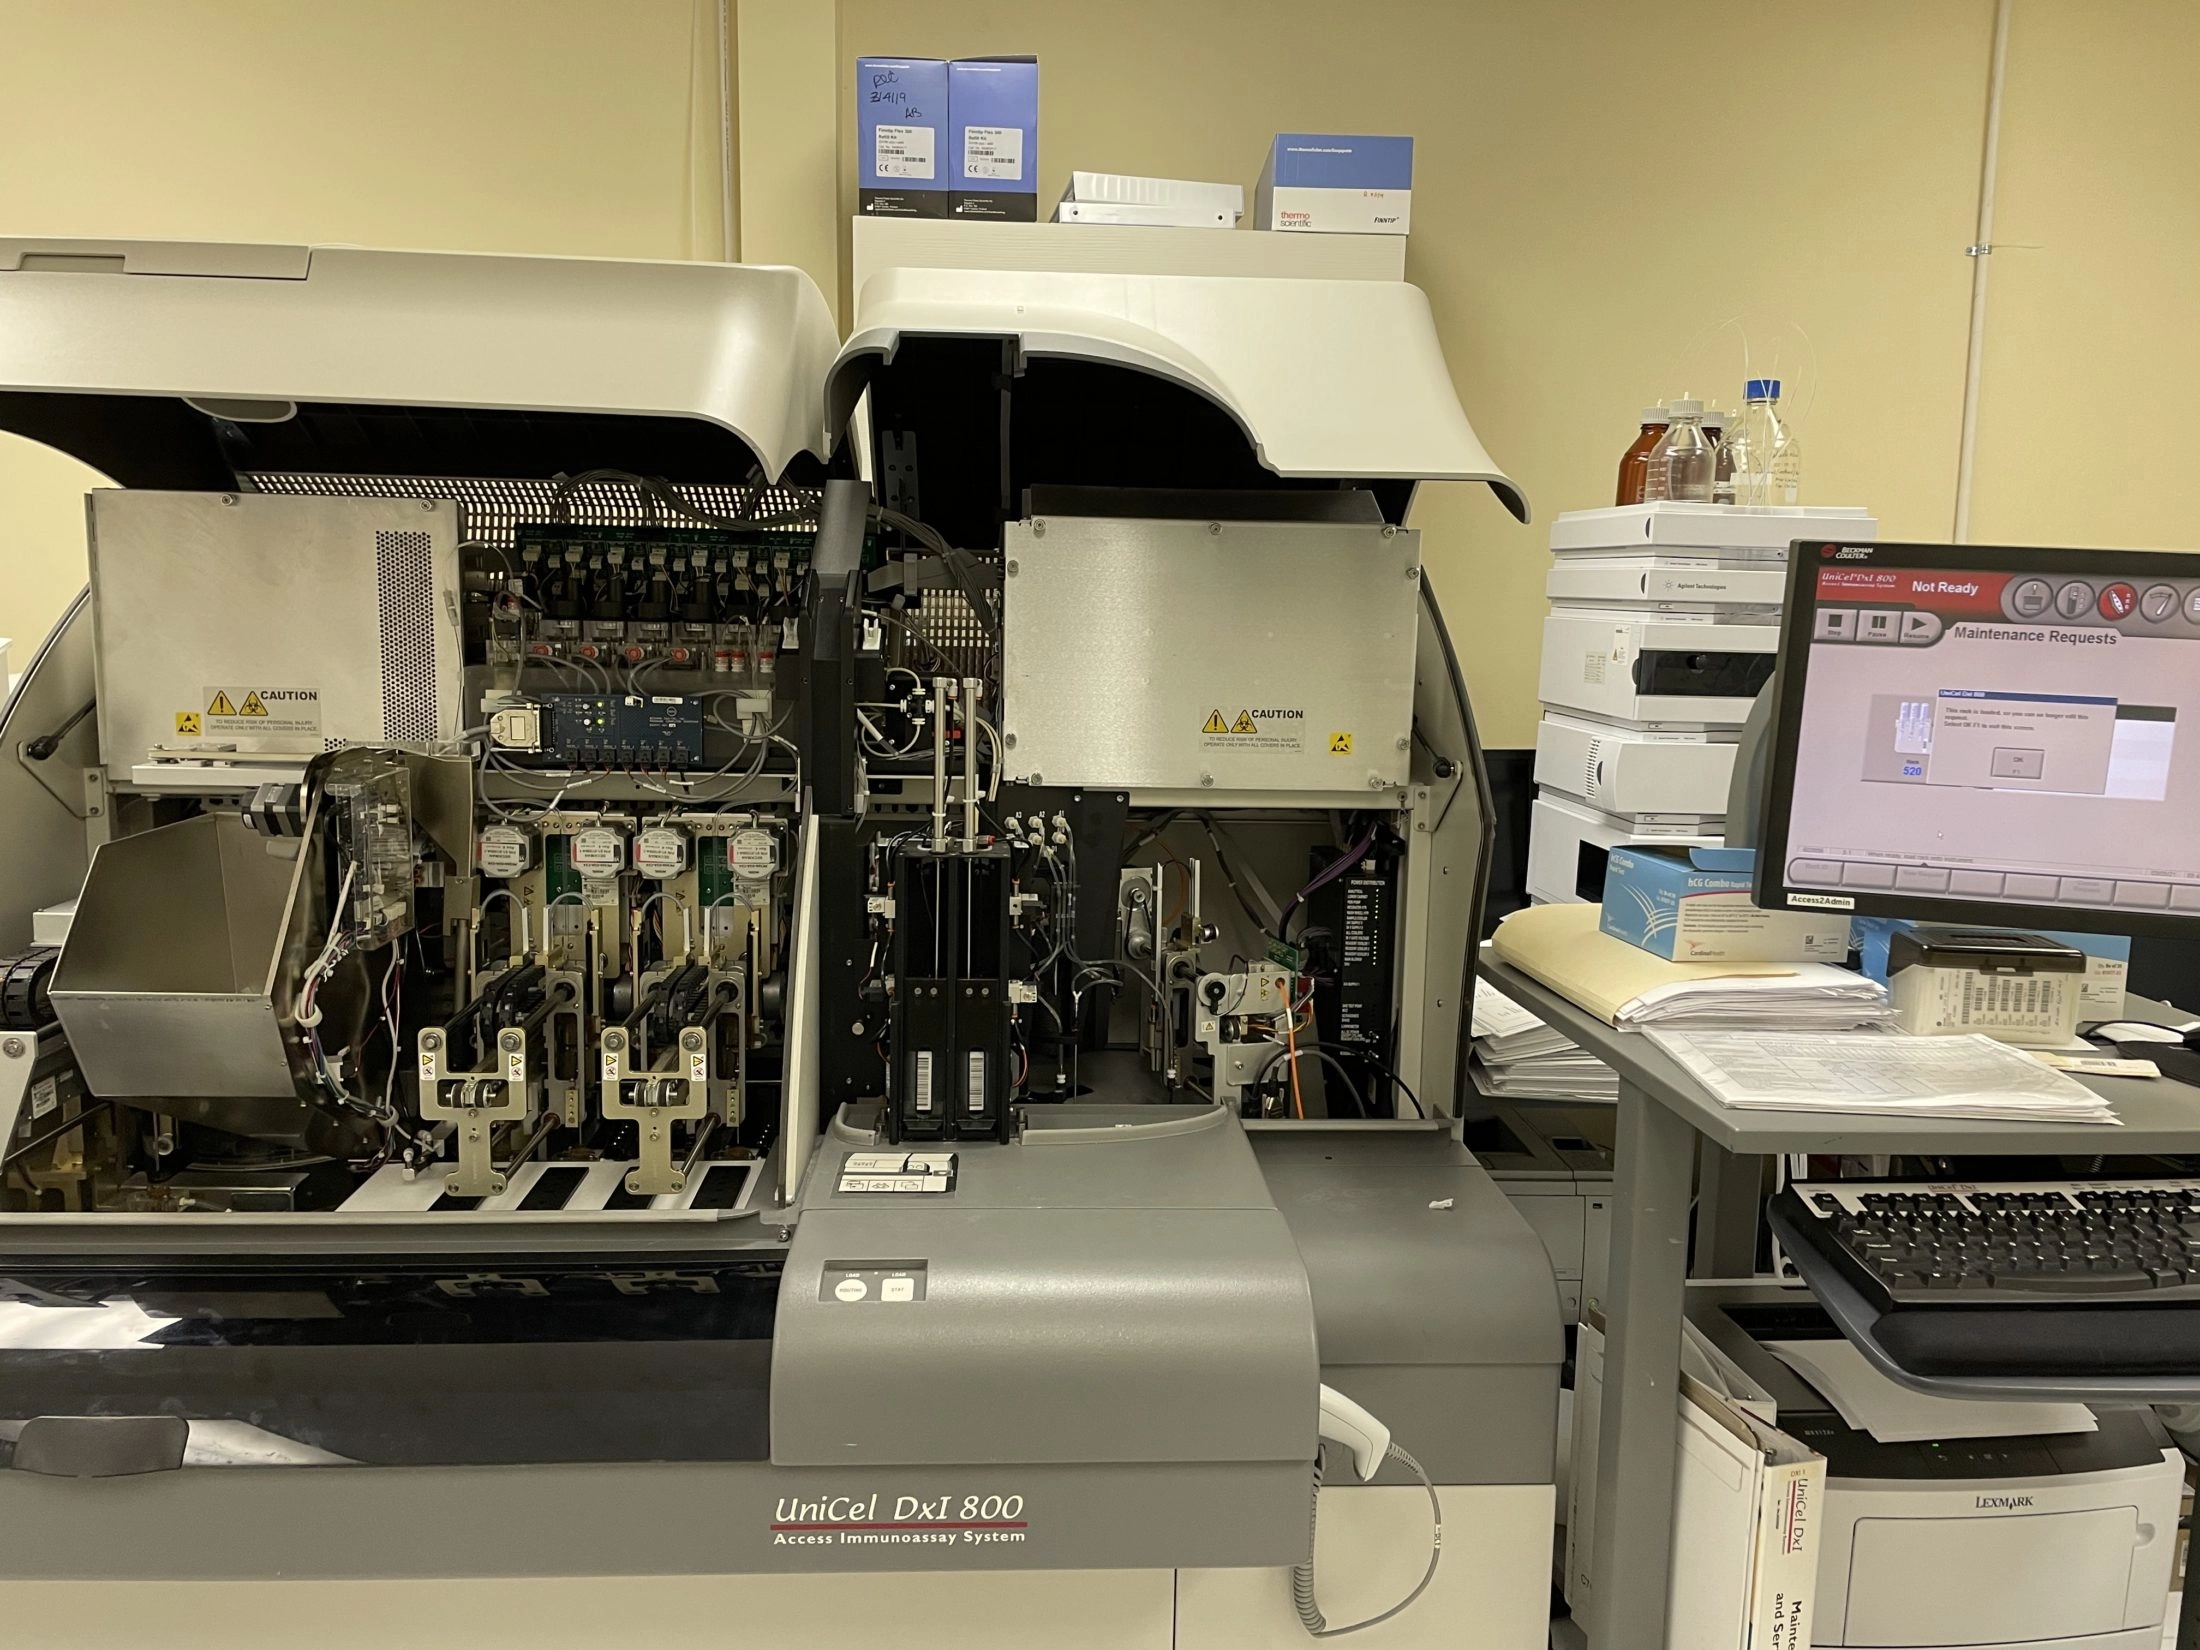 Beckman Coulter UniCel DxI 800